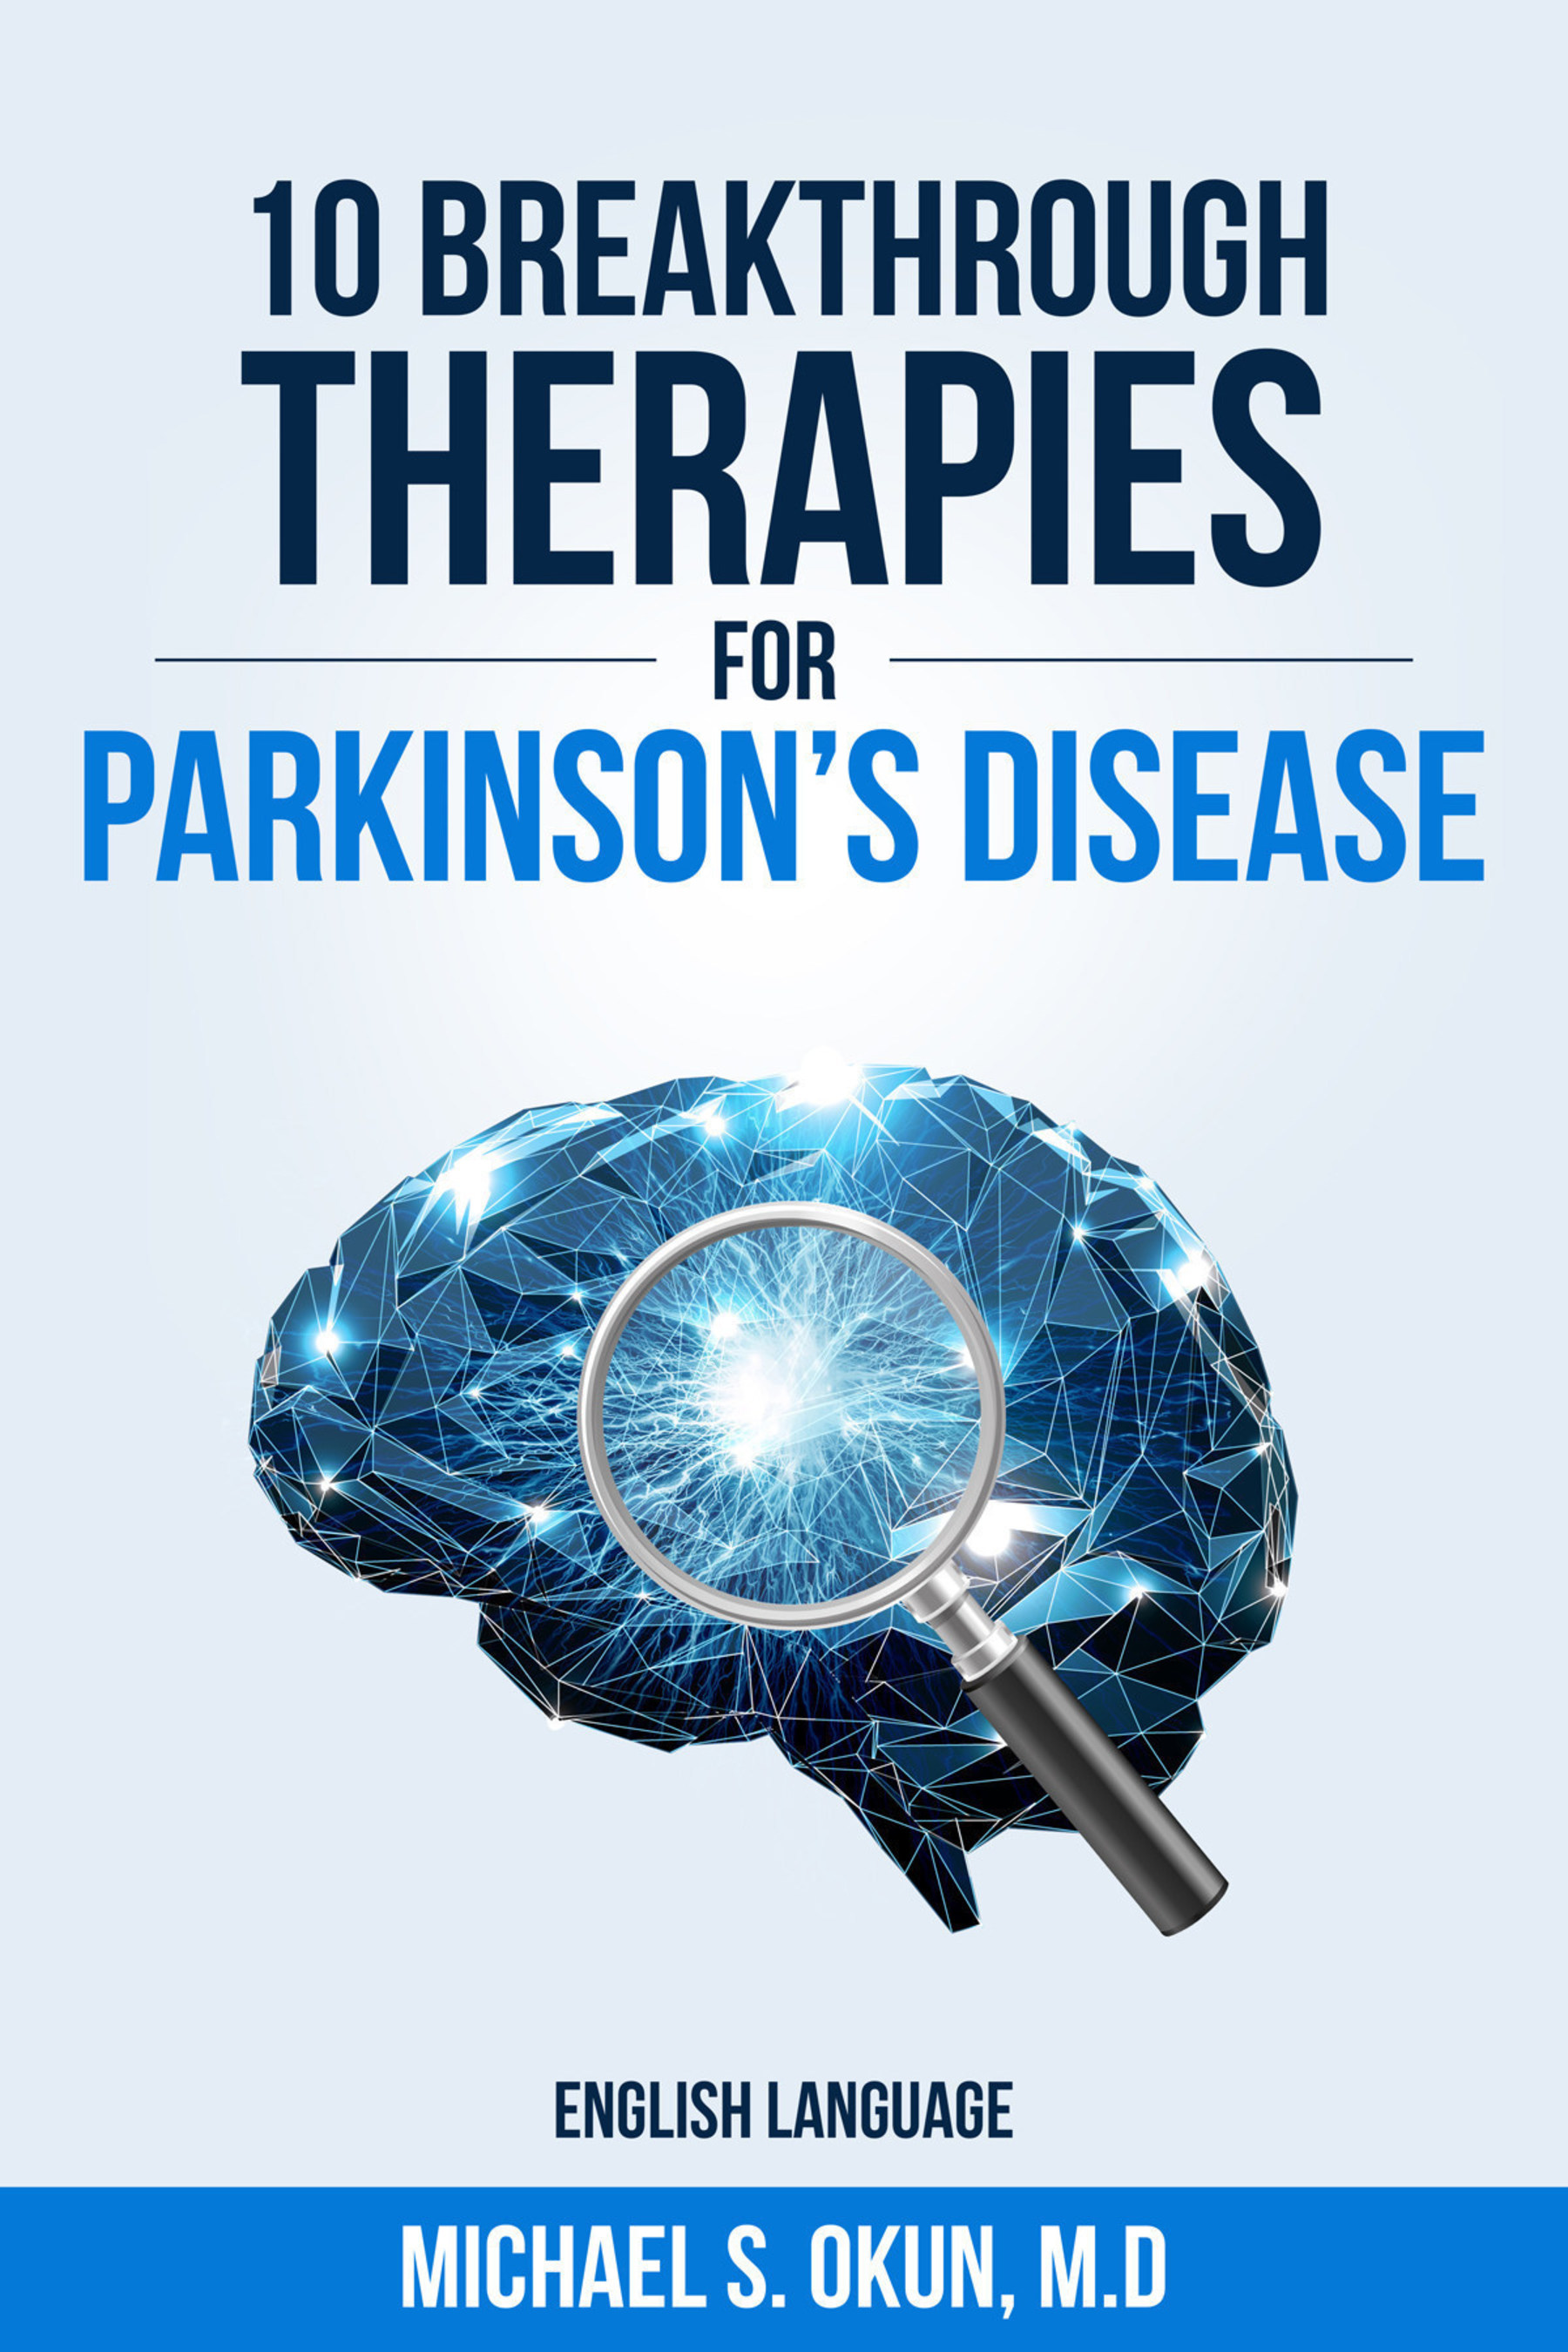 "10 Breakthrough Therapies for Parkinson's Disease" by Michael S. Okun, MD.